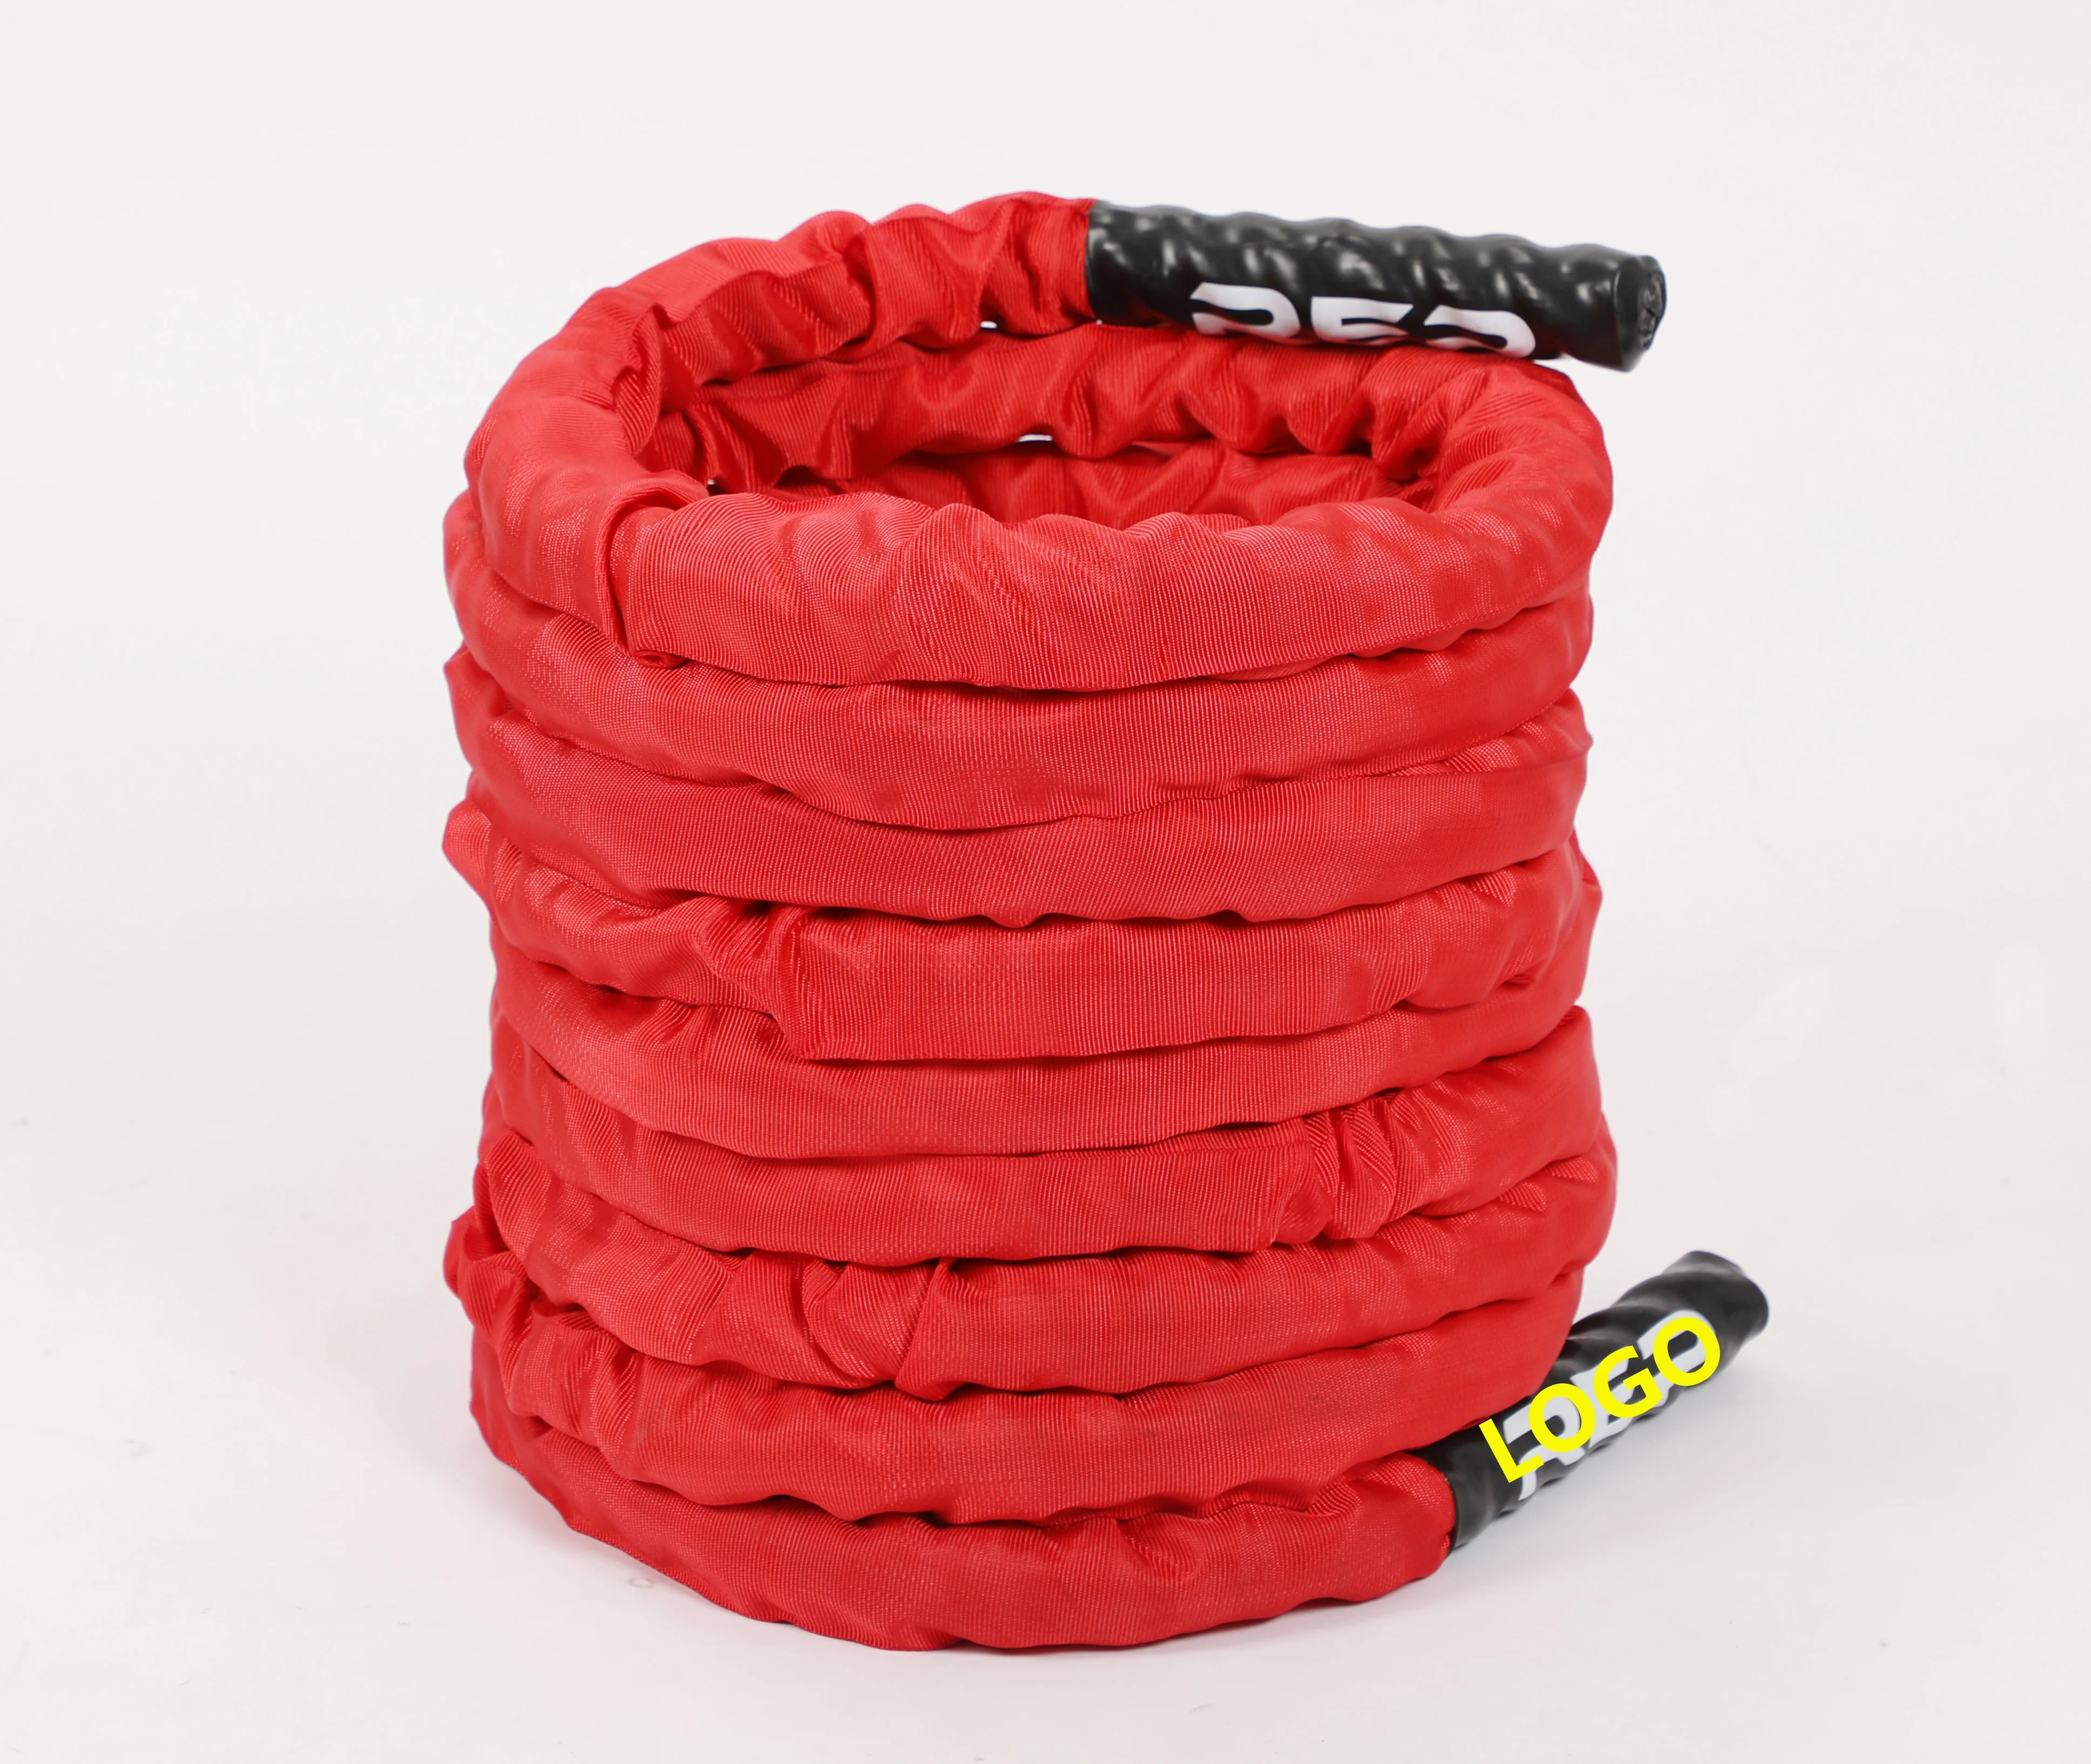 Mondwater Vulkaan kop Polyester Red Gym Training Power Battle Rope 50mm With Sleeve Poly Dacron  30 Feet/9m - Buy Sleeve Battle Rope 9m,Battling Battle Rope,Polyester Power  Rope With Sleeve Product on Alibaba.com